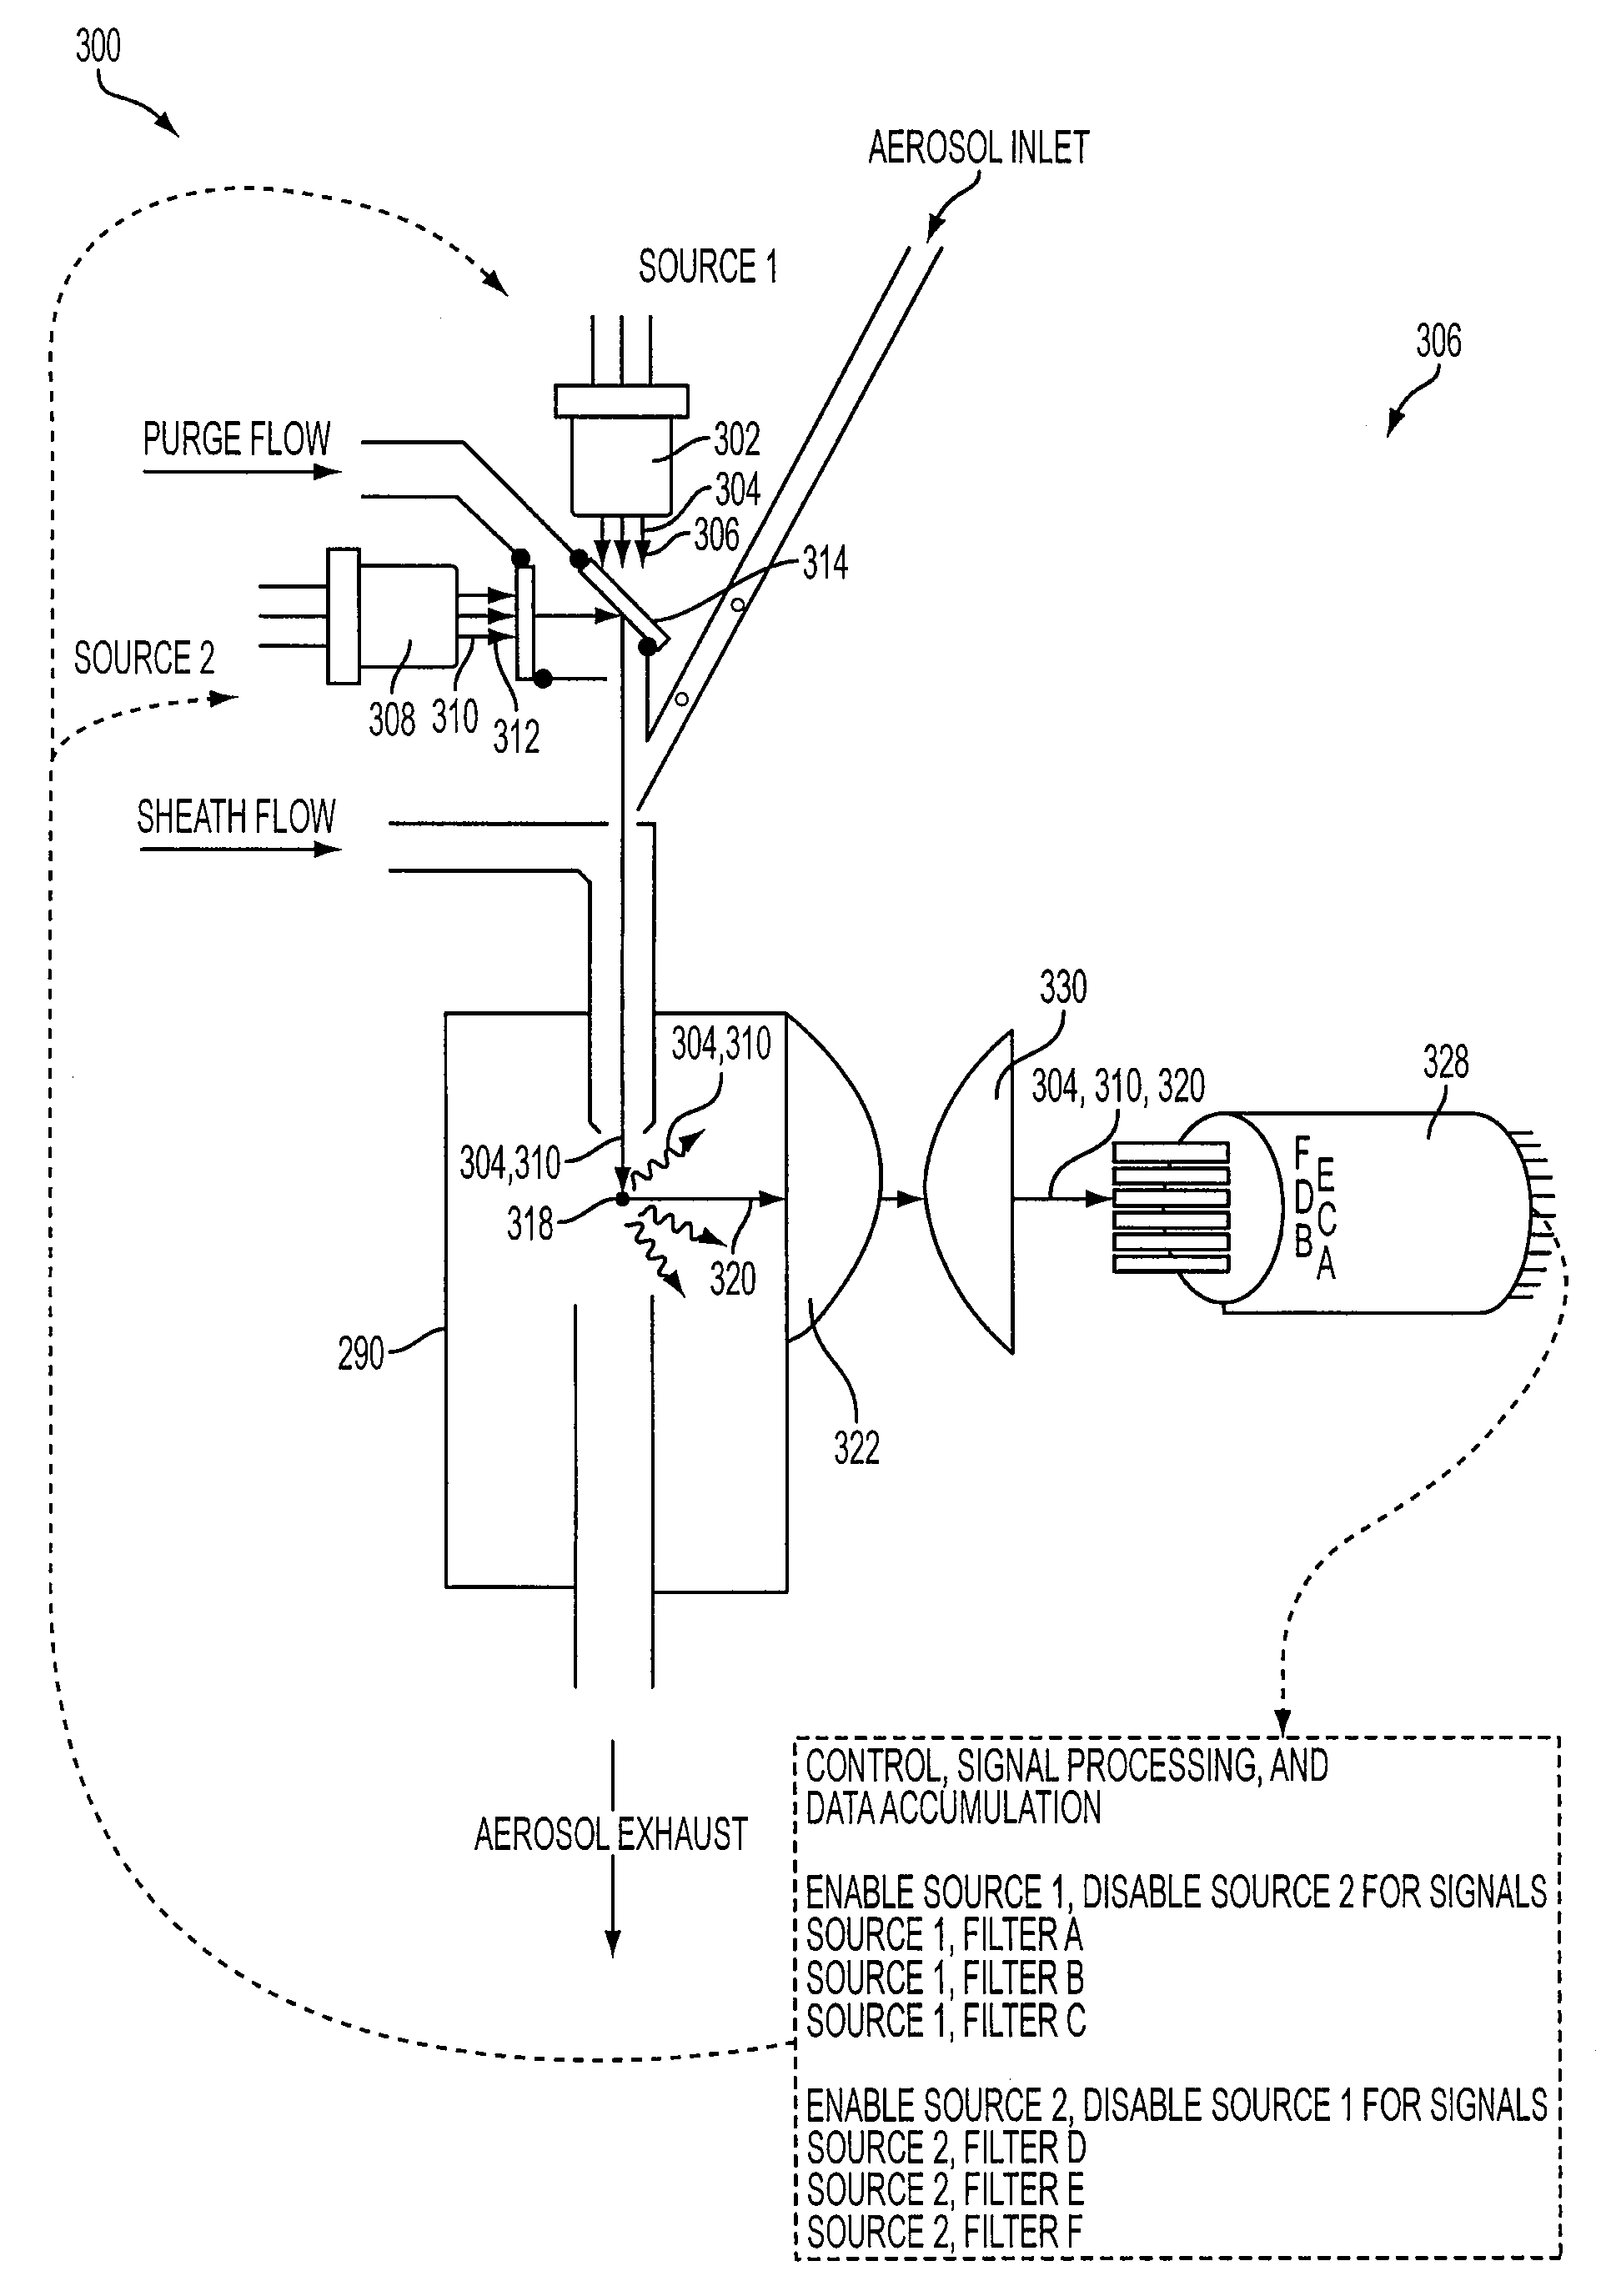 Systems and methods for use in detecting harmful aerosol particles